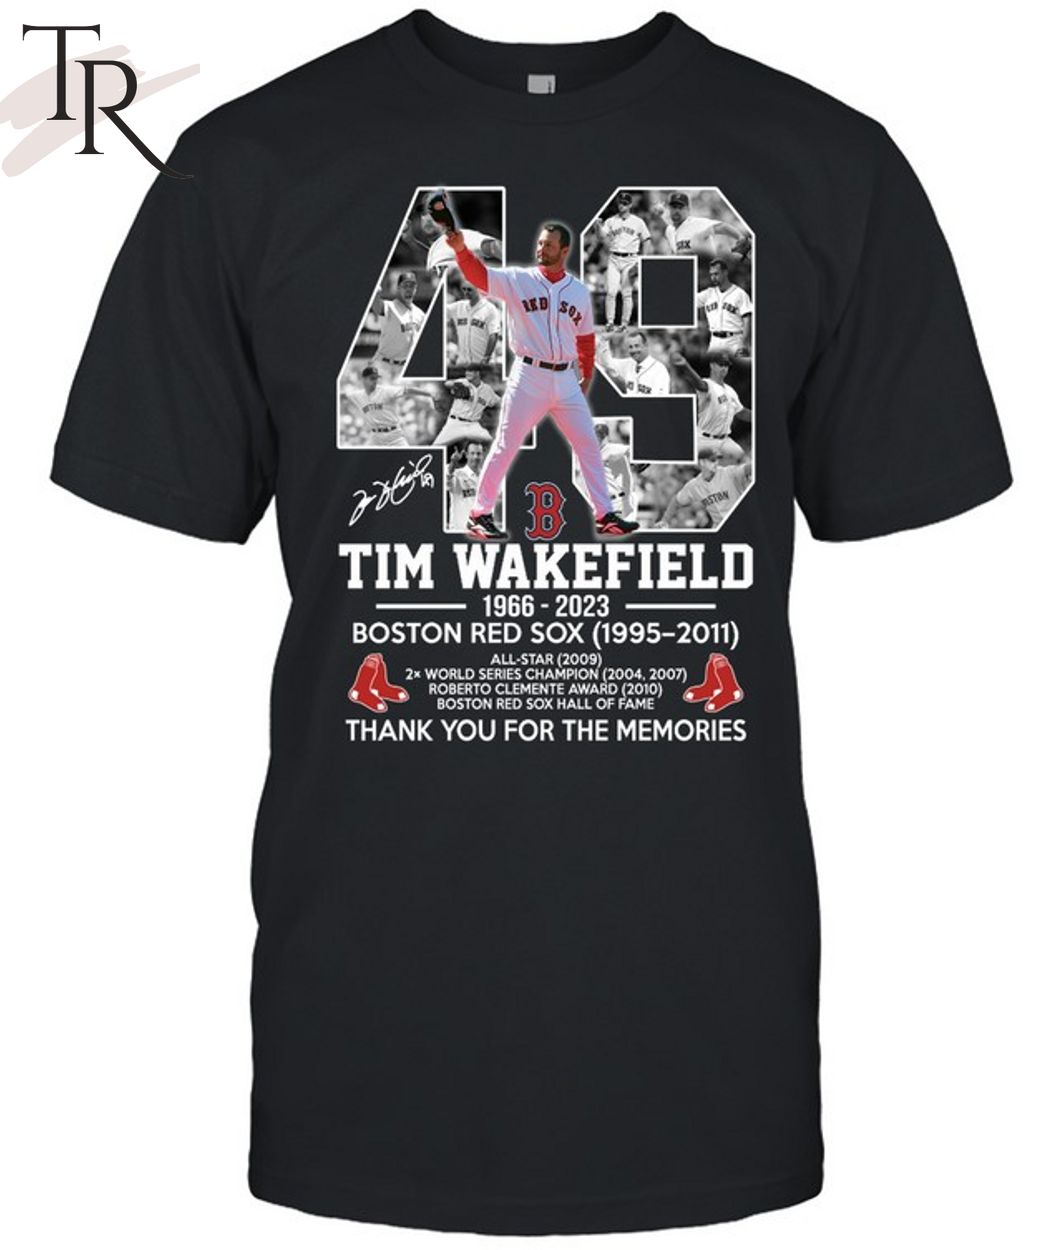 In Memory Of 1966 - 2023 Tim Wakefield Pittsburgh Pirates 1992 - 1993  Boston Red Sox 1995 - 2011 Thank You For The Memories T-Shirt - Torunstyle